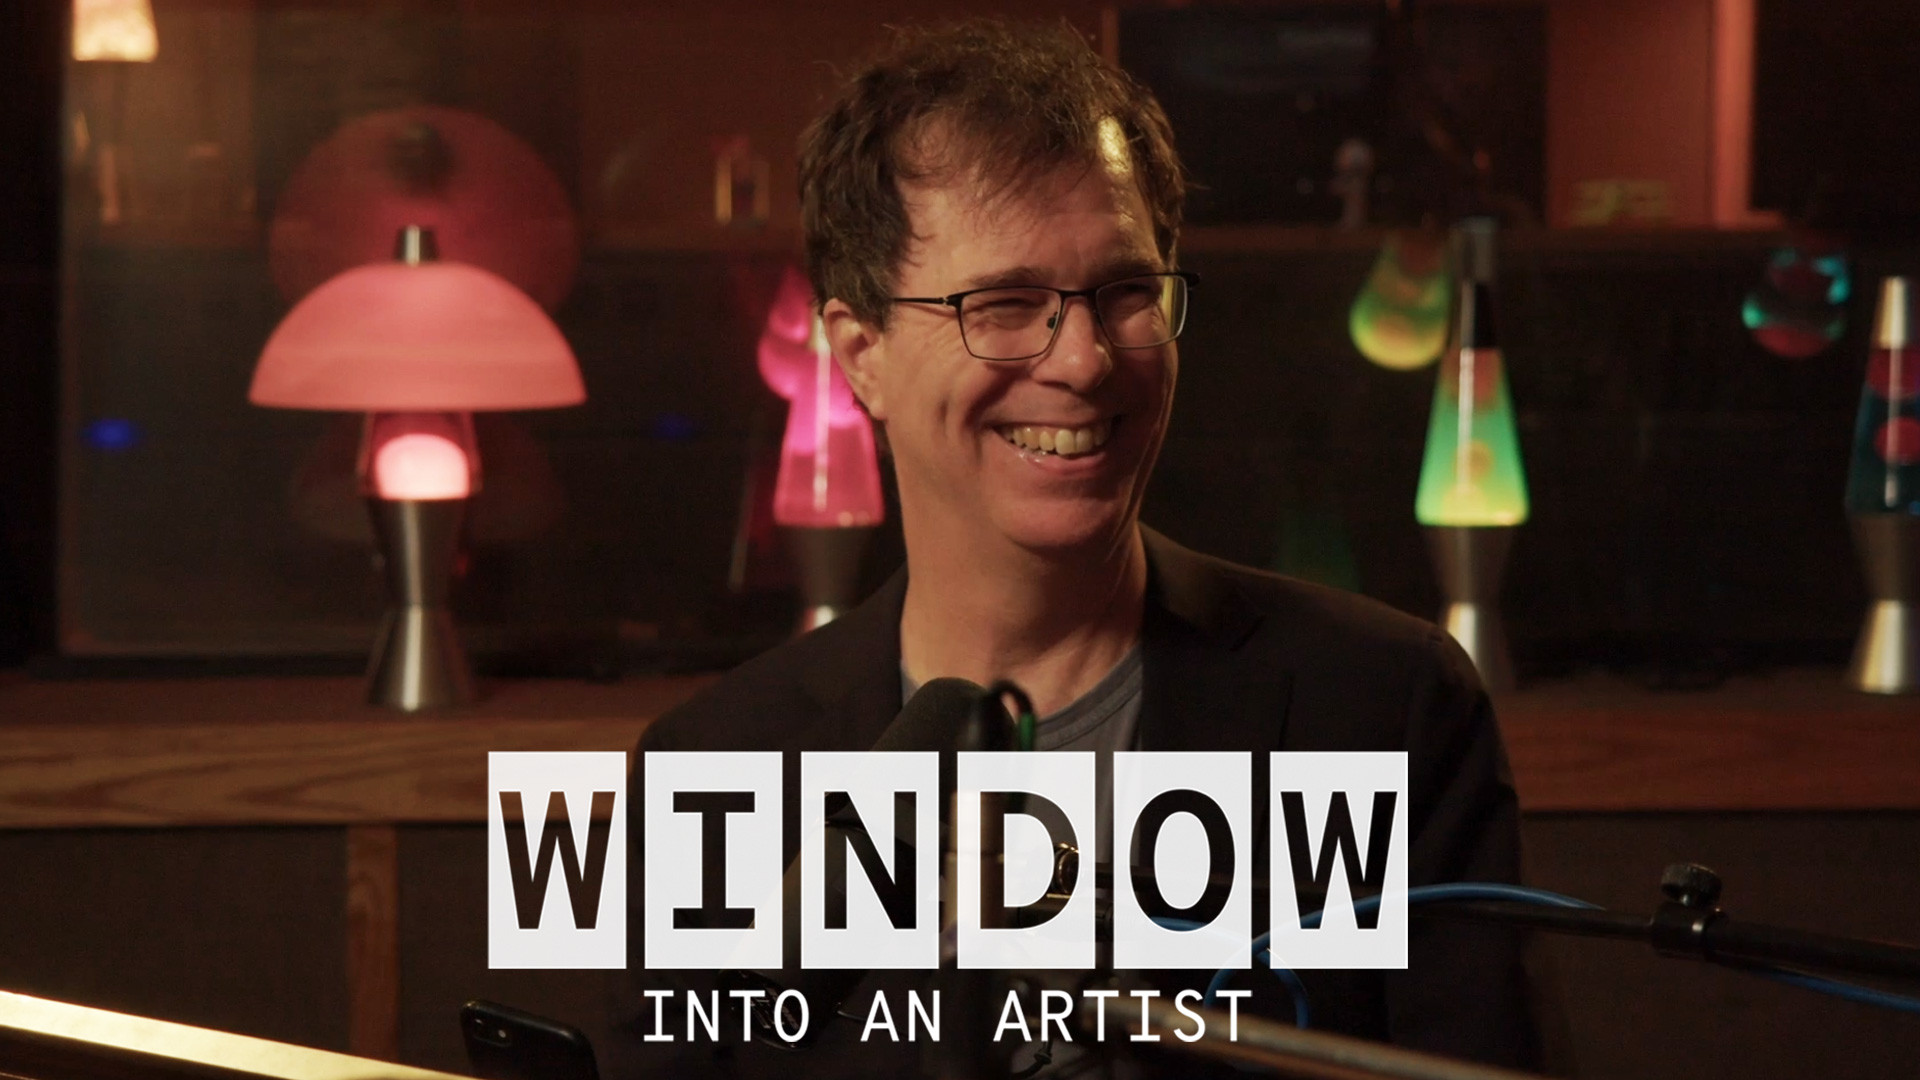 Ben Sings smiling in front of a mic with an overlay of text that reads ‘Window Into an Artist’